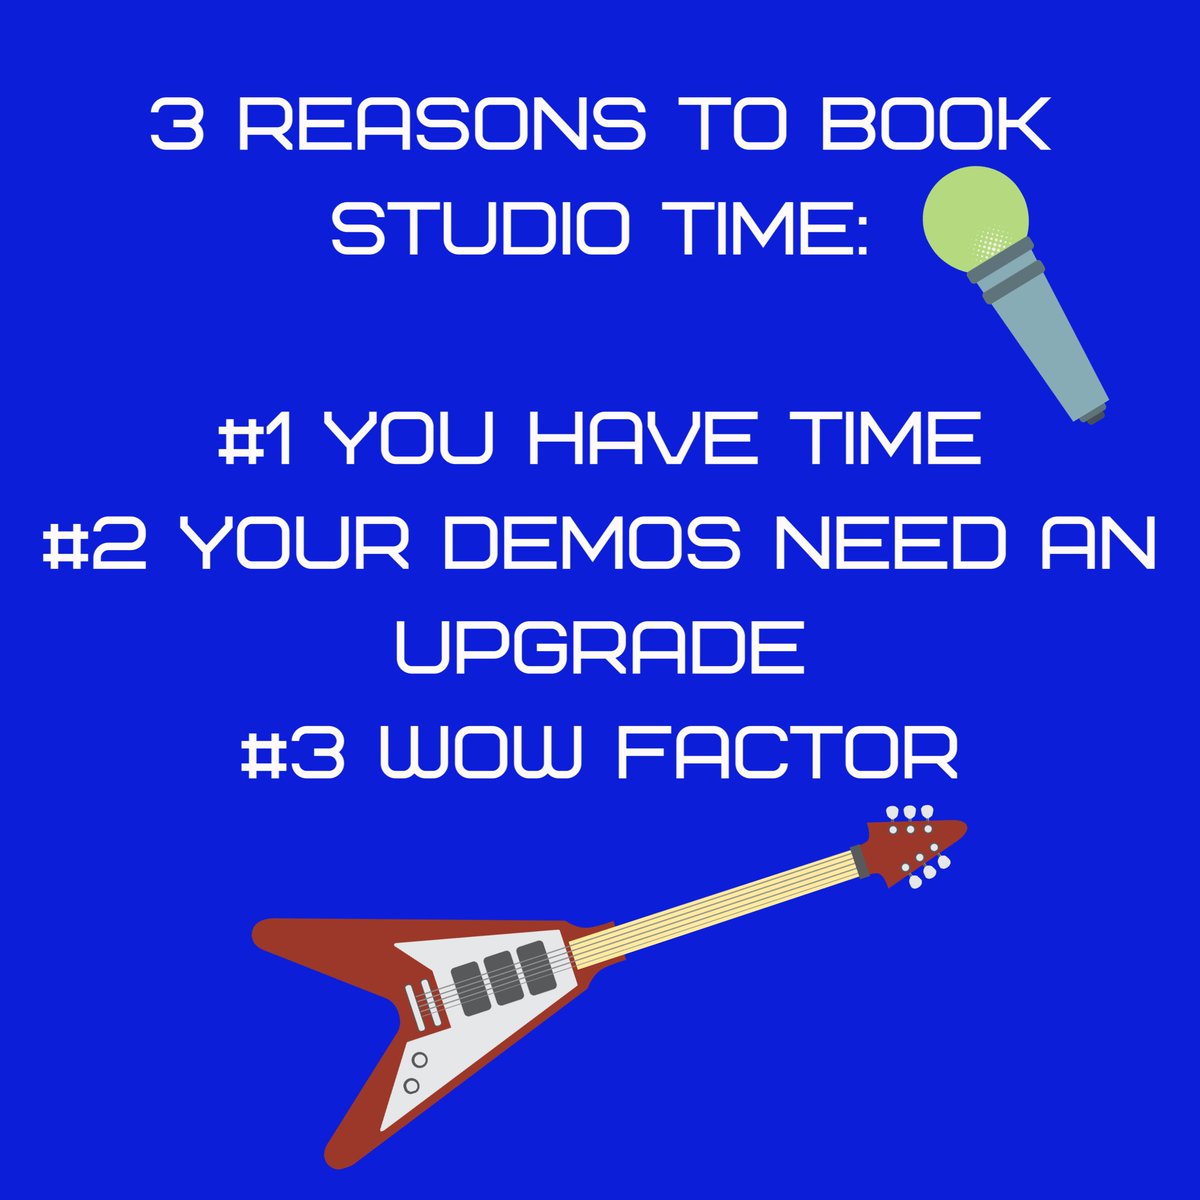 I know you’ve been waiting to do this for some time now.. so why are you waiting still?! I got 3 reasons for you to get the process started. Let’s do some studio time! #recordingstudio #audioproduction #mixmaster #recordproduction #rainyriverdistrict